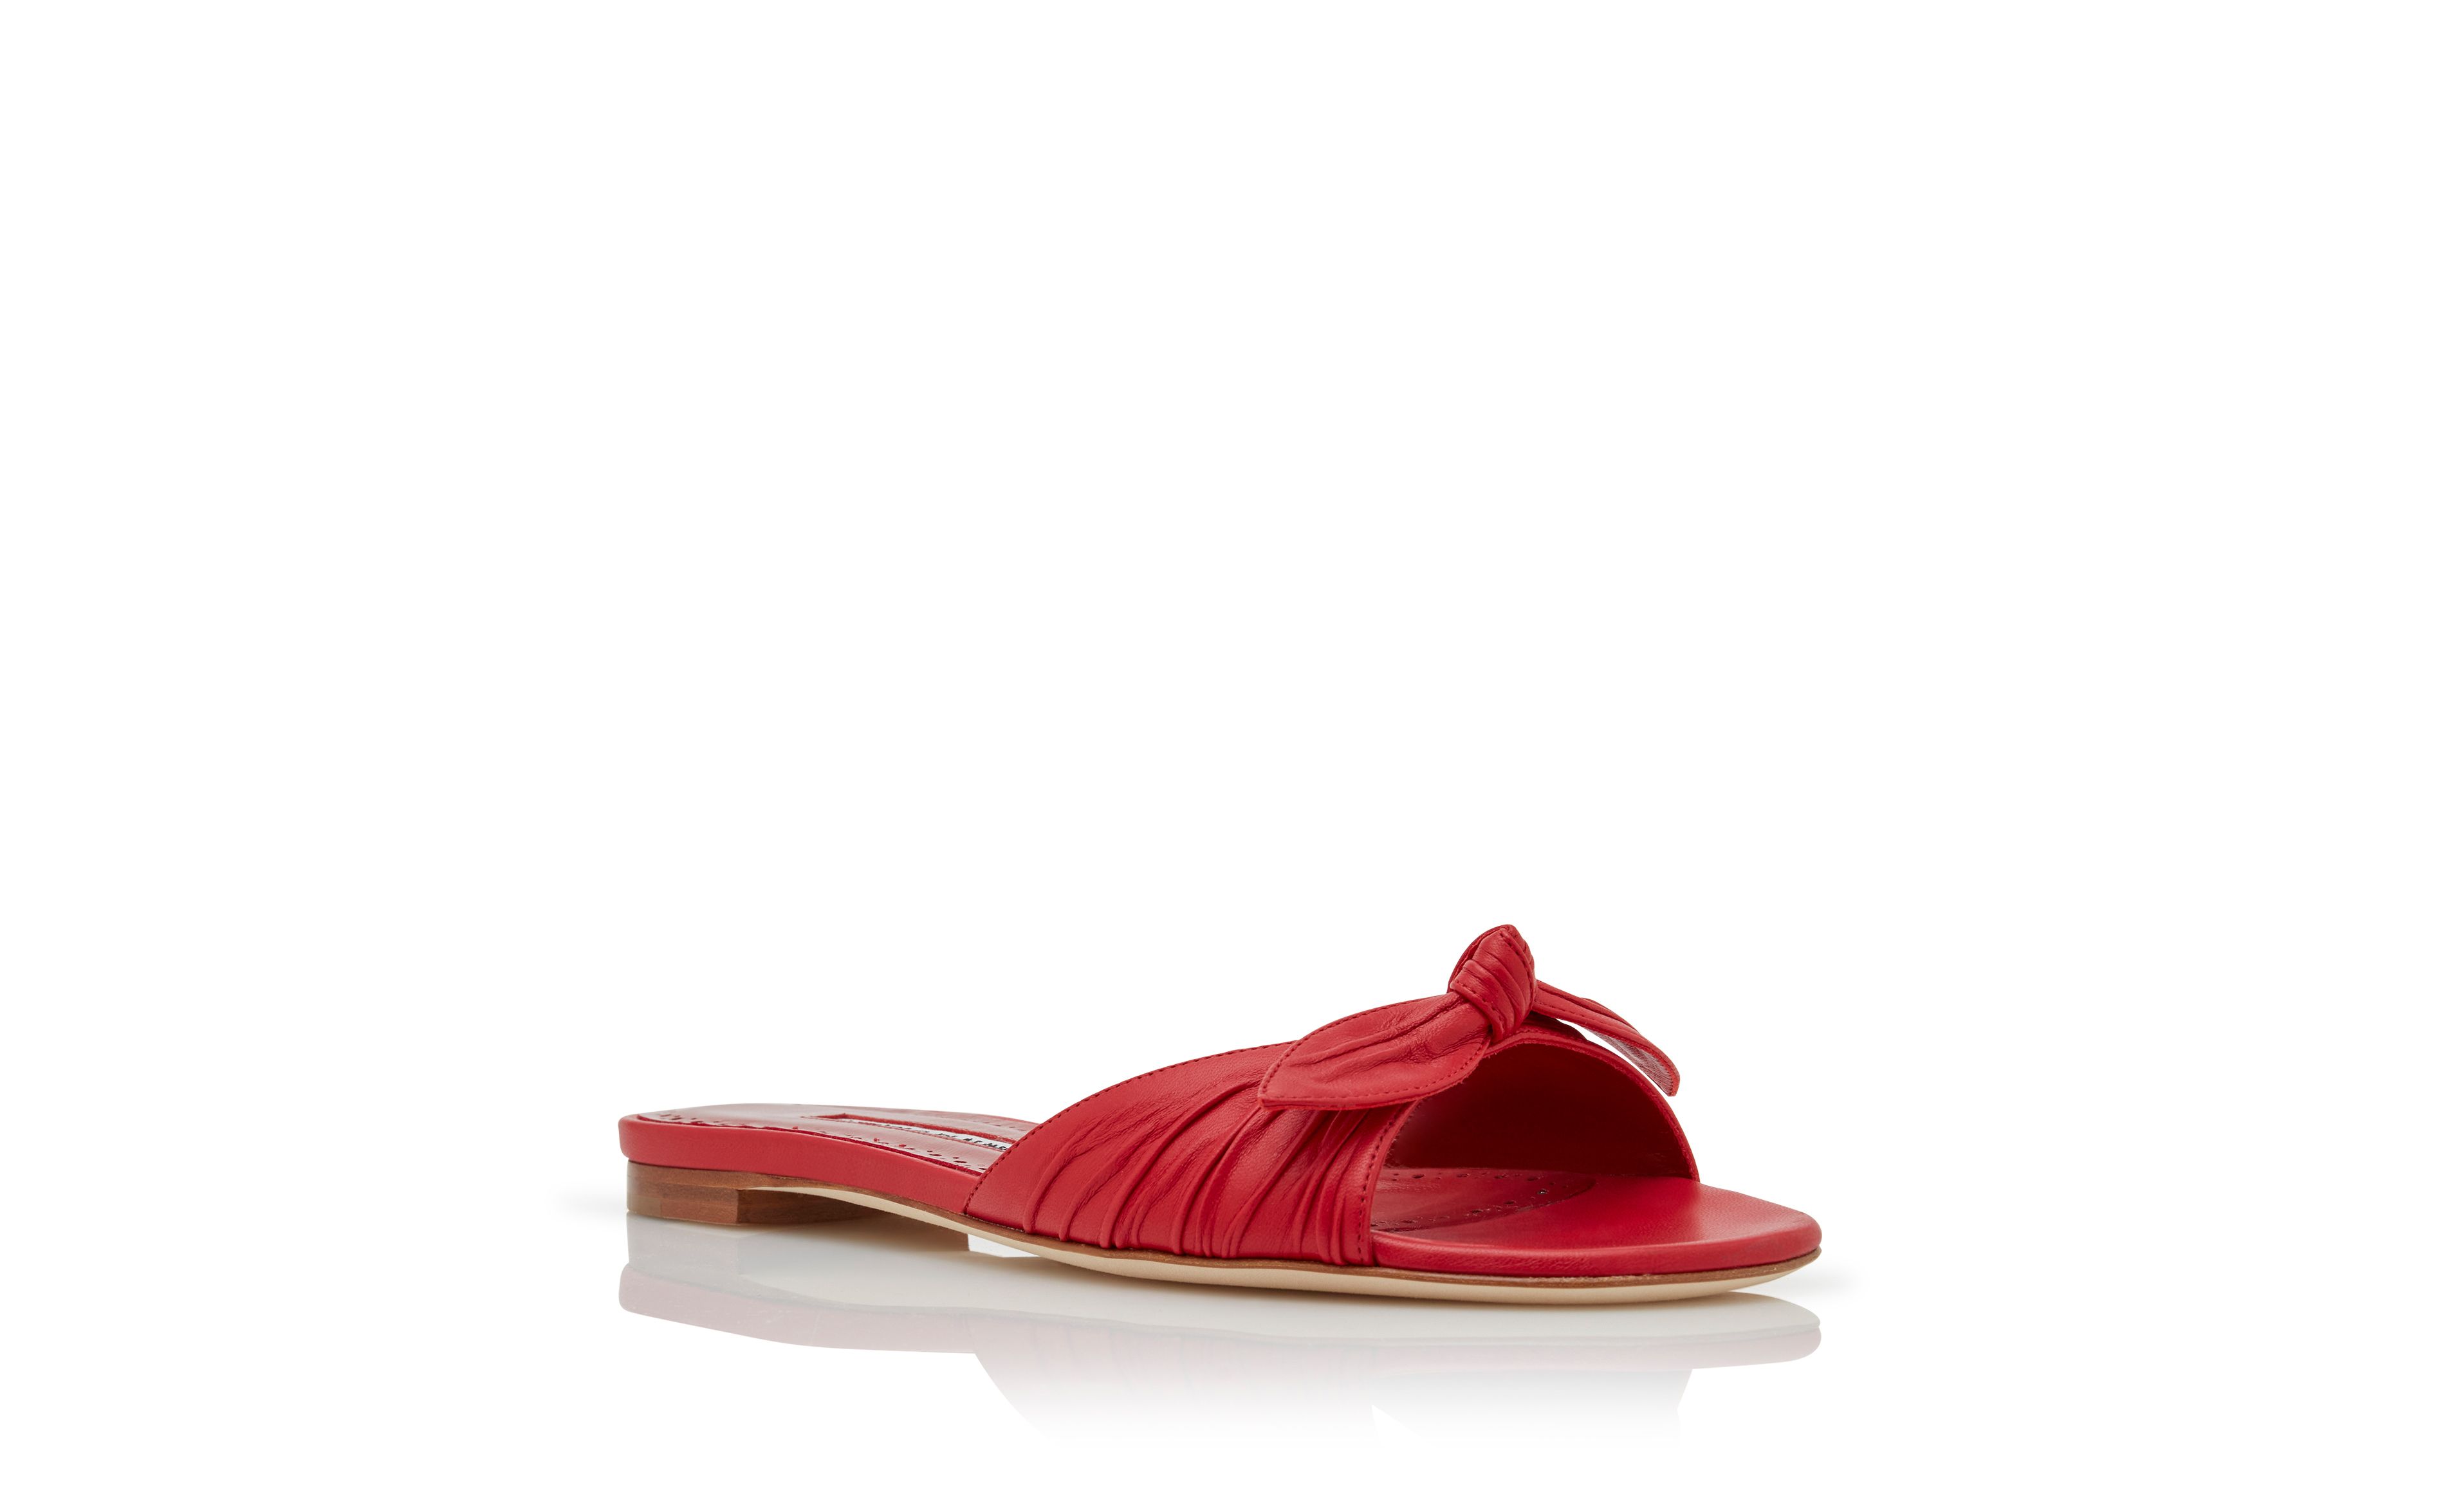 Designer Red Nappa Leather Bow Detail Flat Sandals - Image Upsell